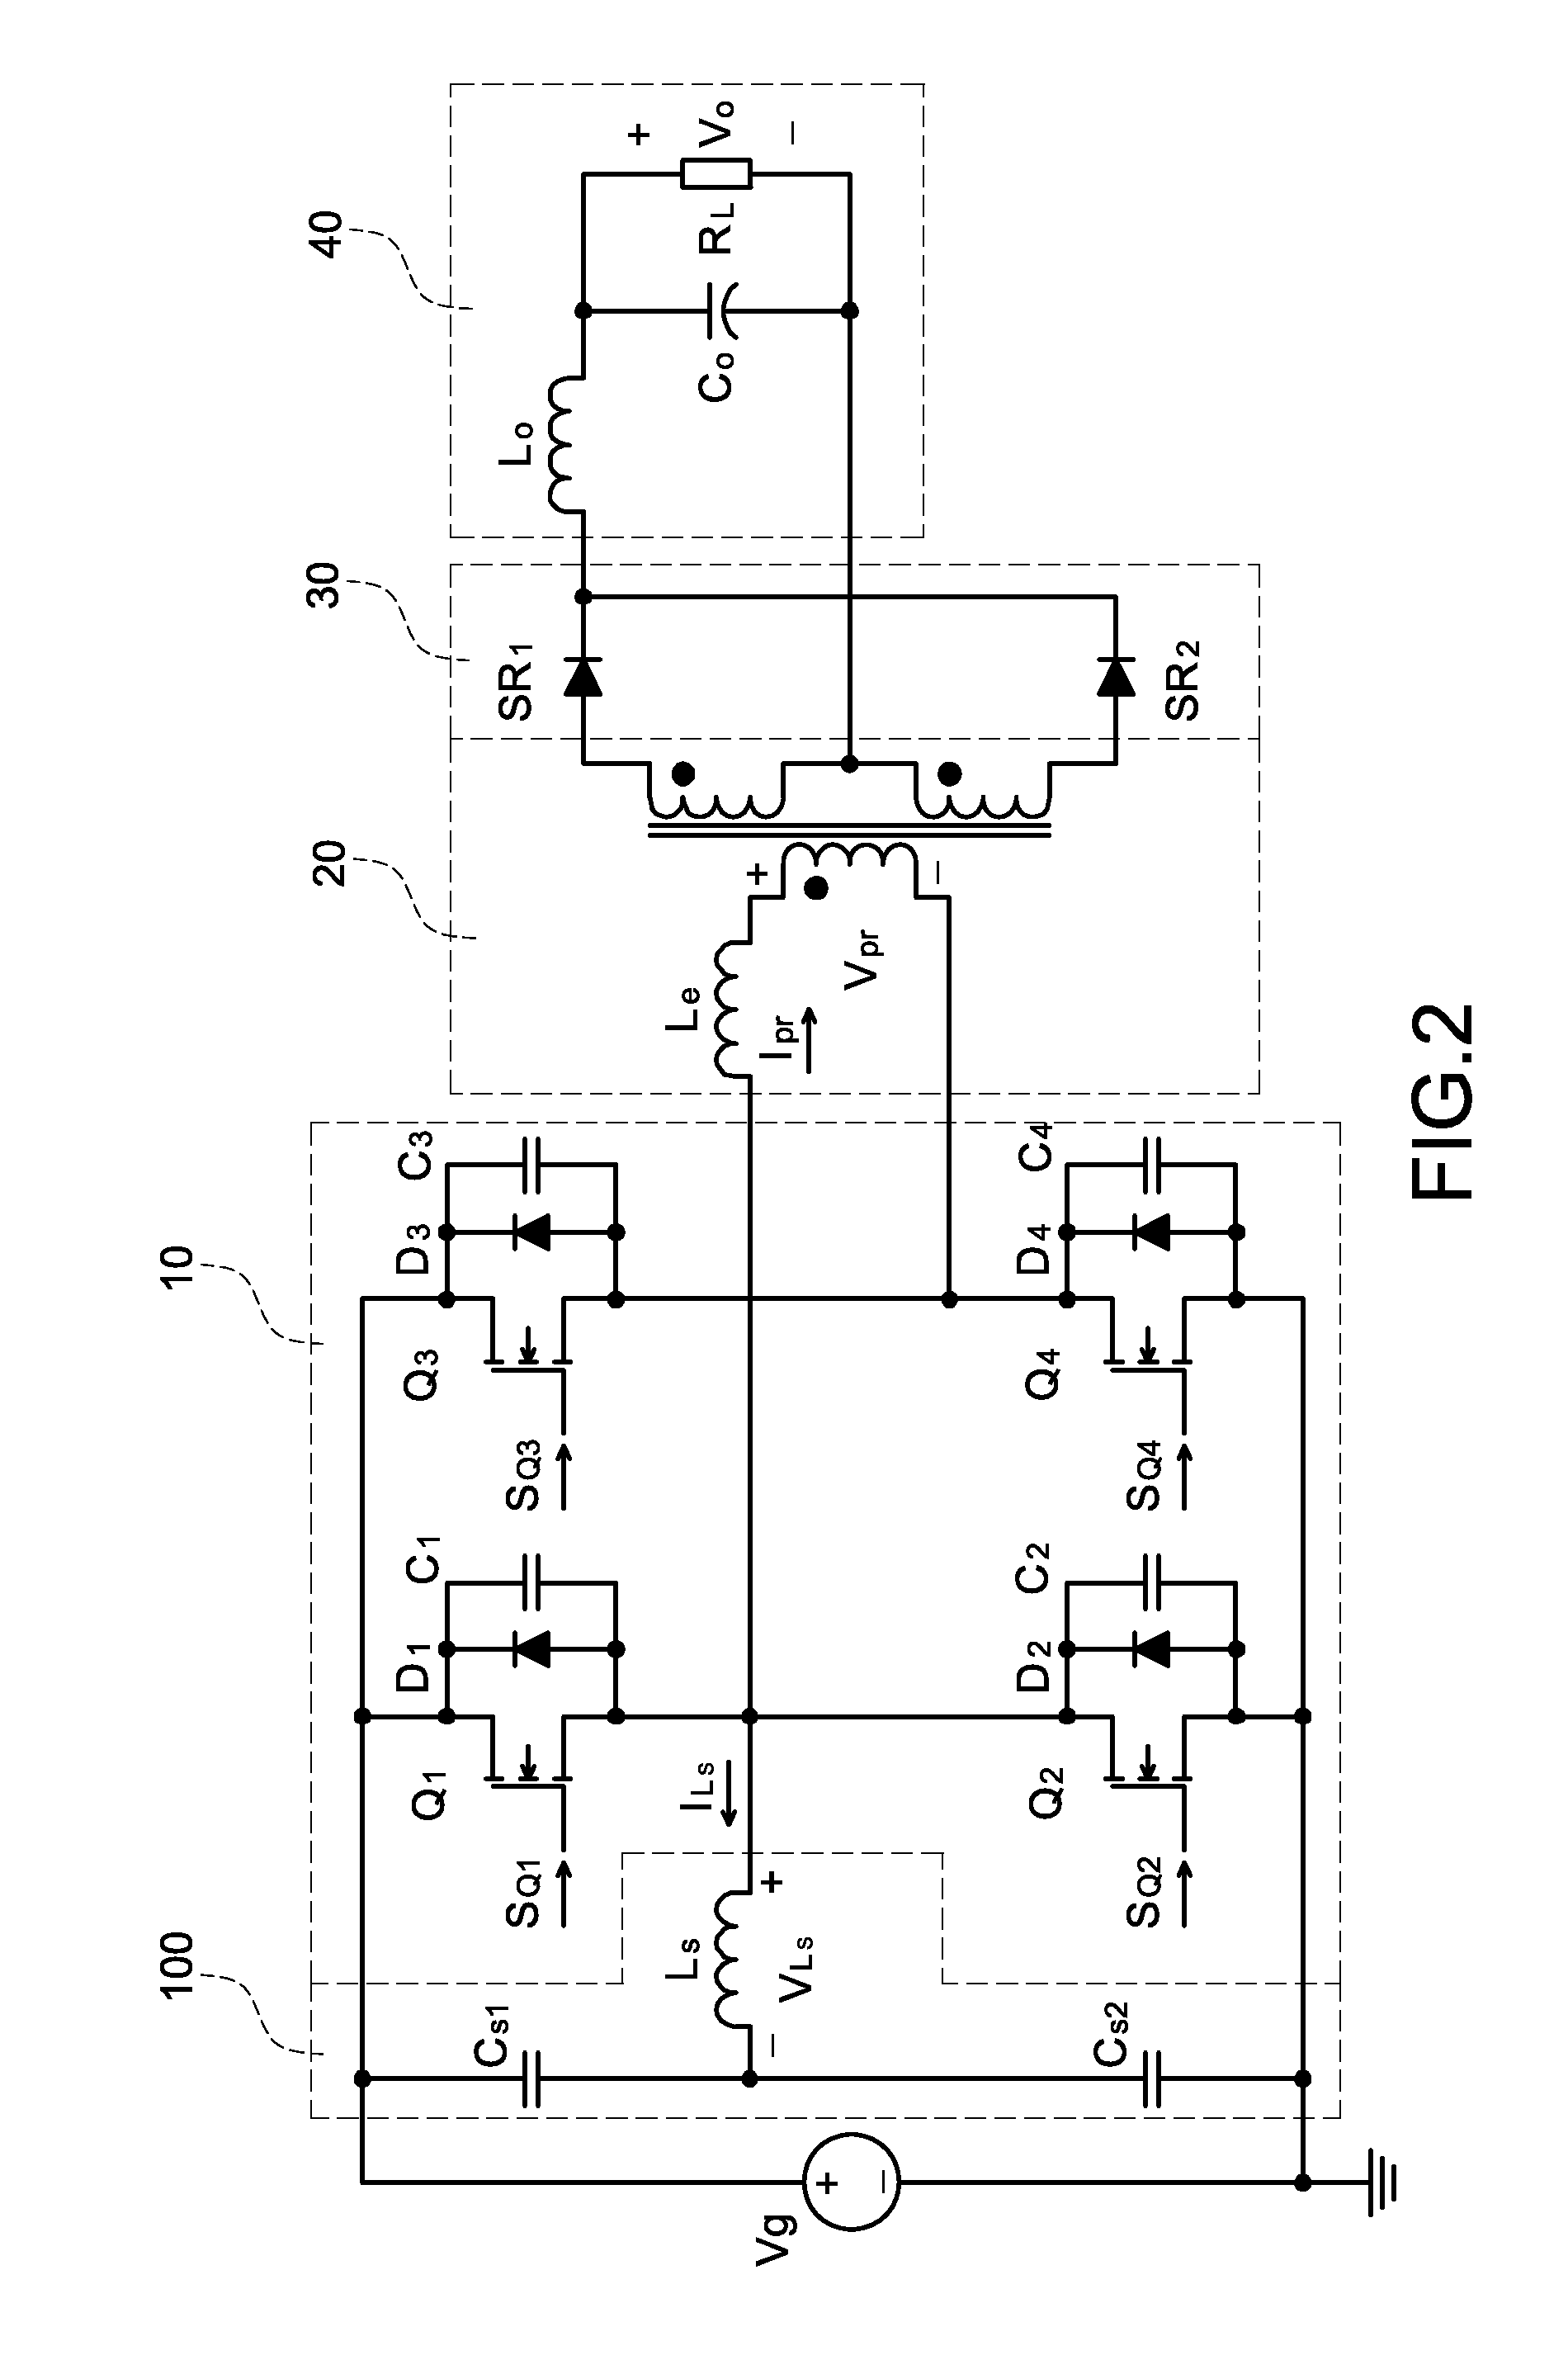 Full-bridge phase-shift converter with auxiliary zero-voltage-switching circuit